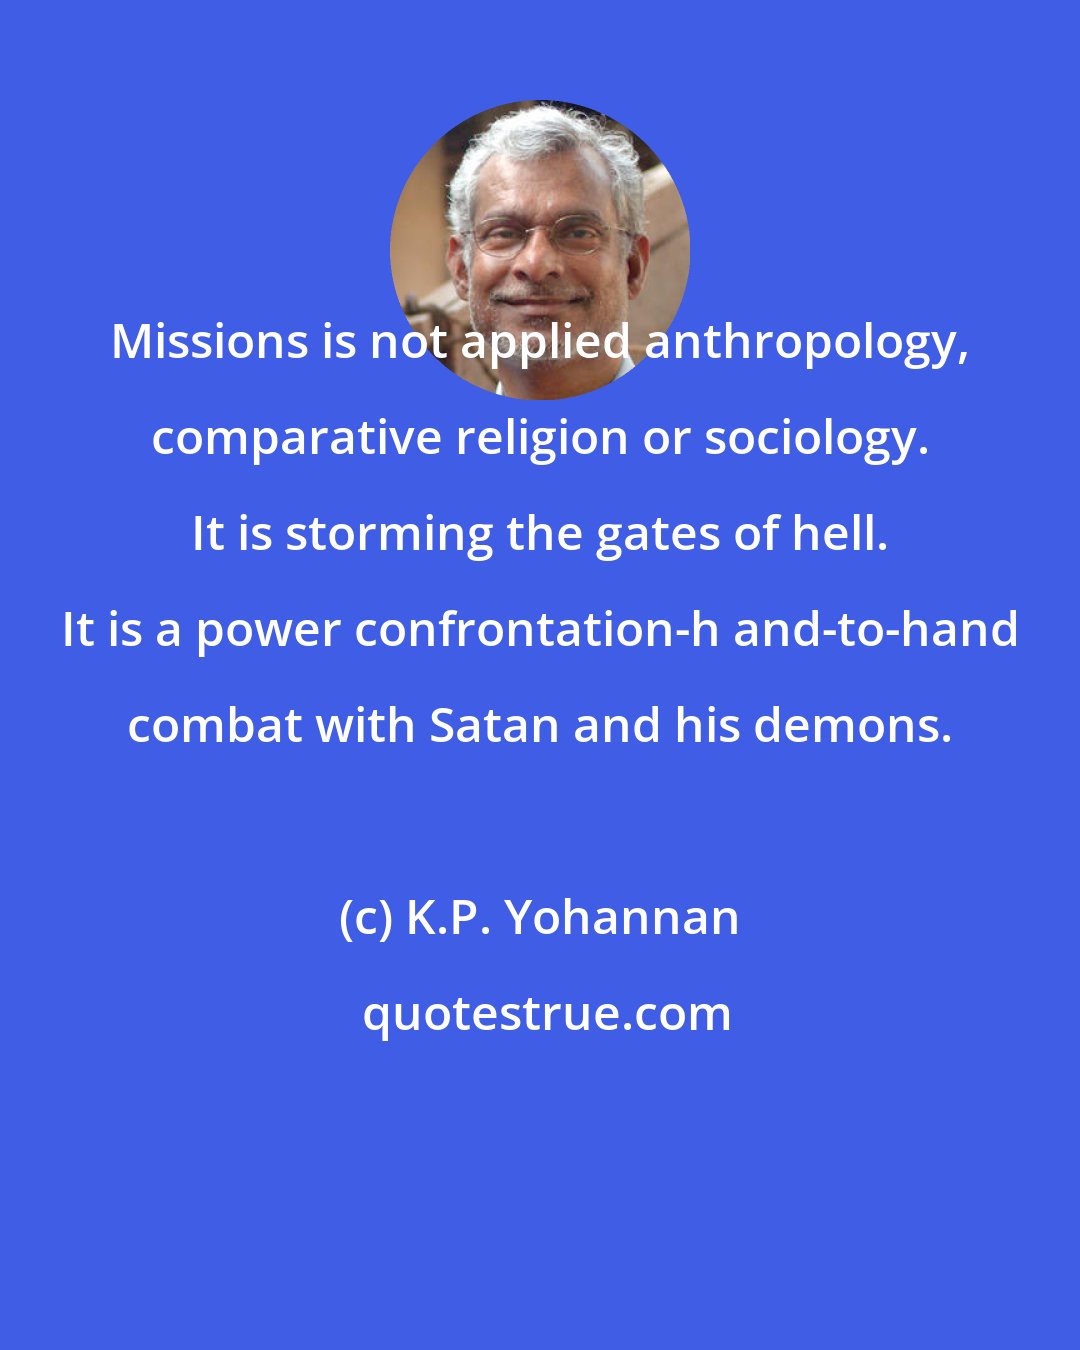 K.P. Yohannan: Missions is not applied anthropology, comparative religion or sociology. It is storming the gates of hell. It is a power confrontation-h and-to-hand combat with Satan and his demons.